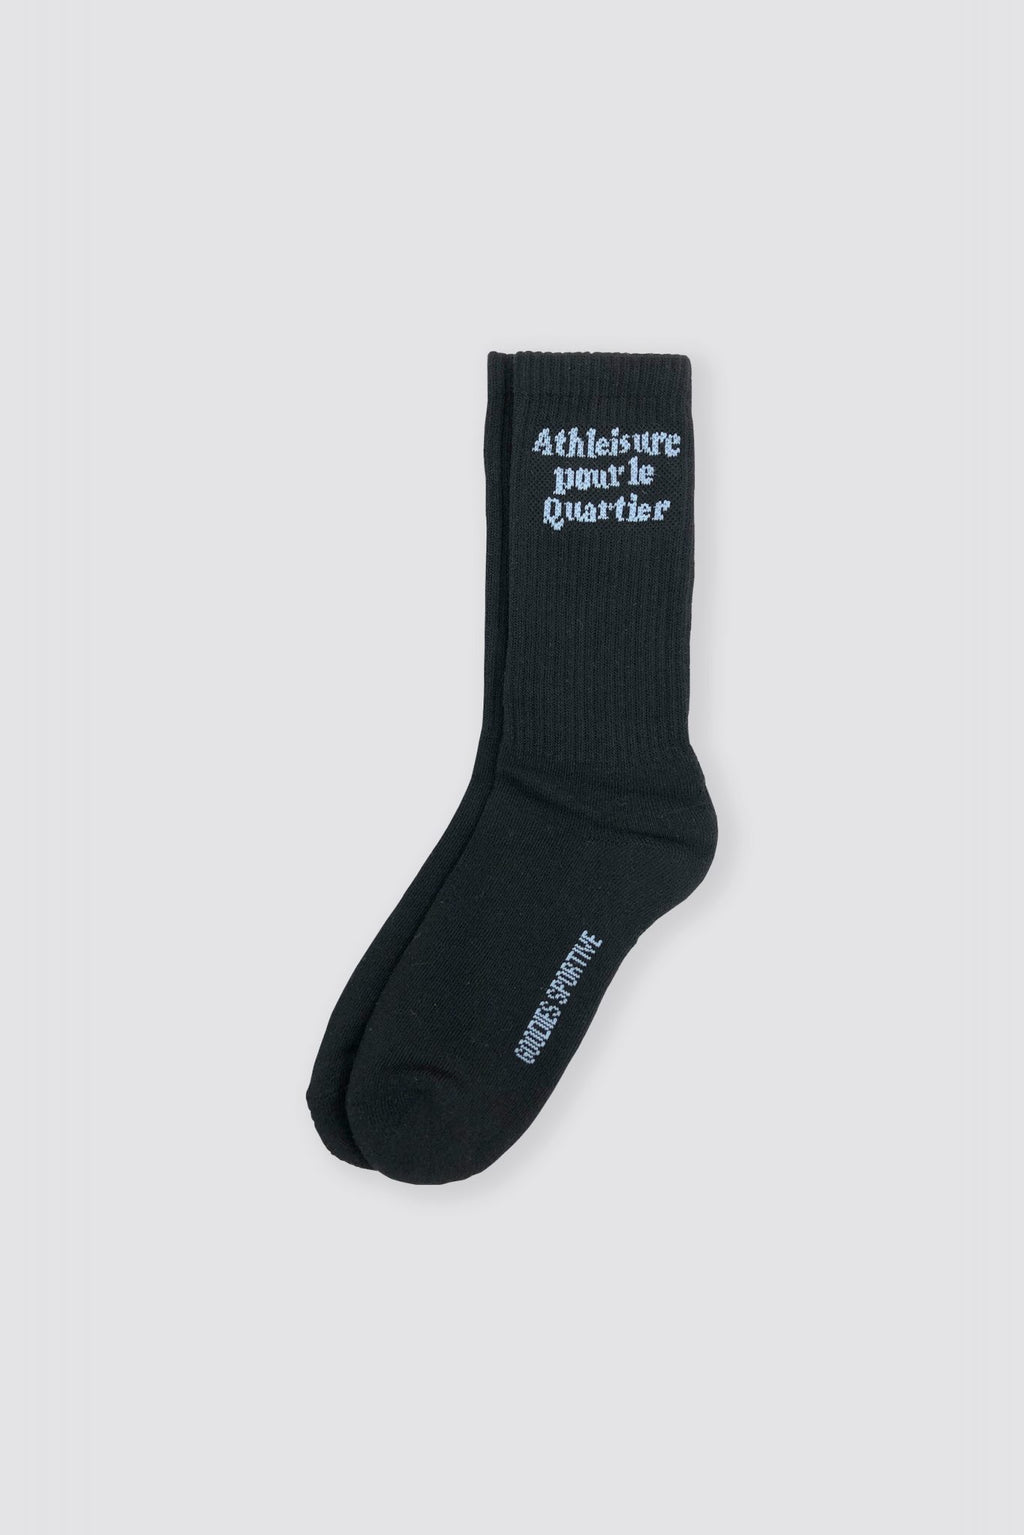 Goodies Sportive - Athleisure Black Sock - One Size